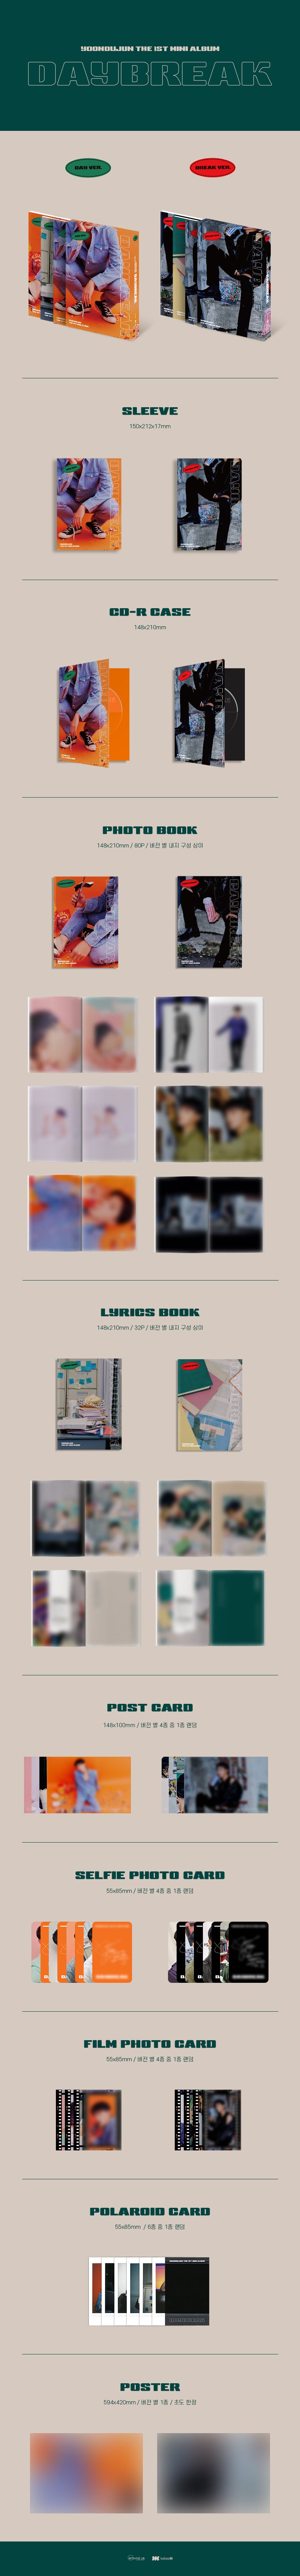 1 CD
1 Photo Book (80 pages)
1 Lyrics Book (32 pages)
1 Post
1 Selfie
1 Film
1 Polaroid